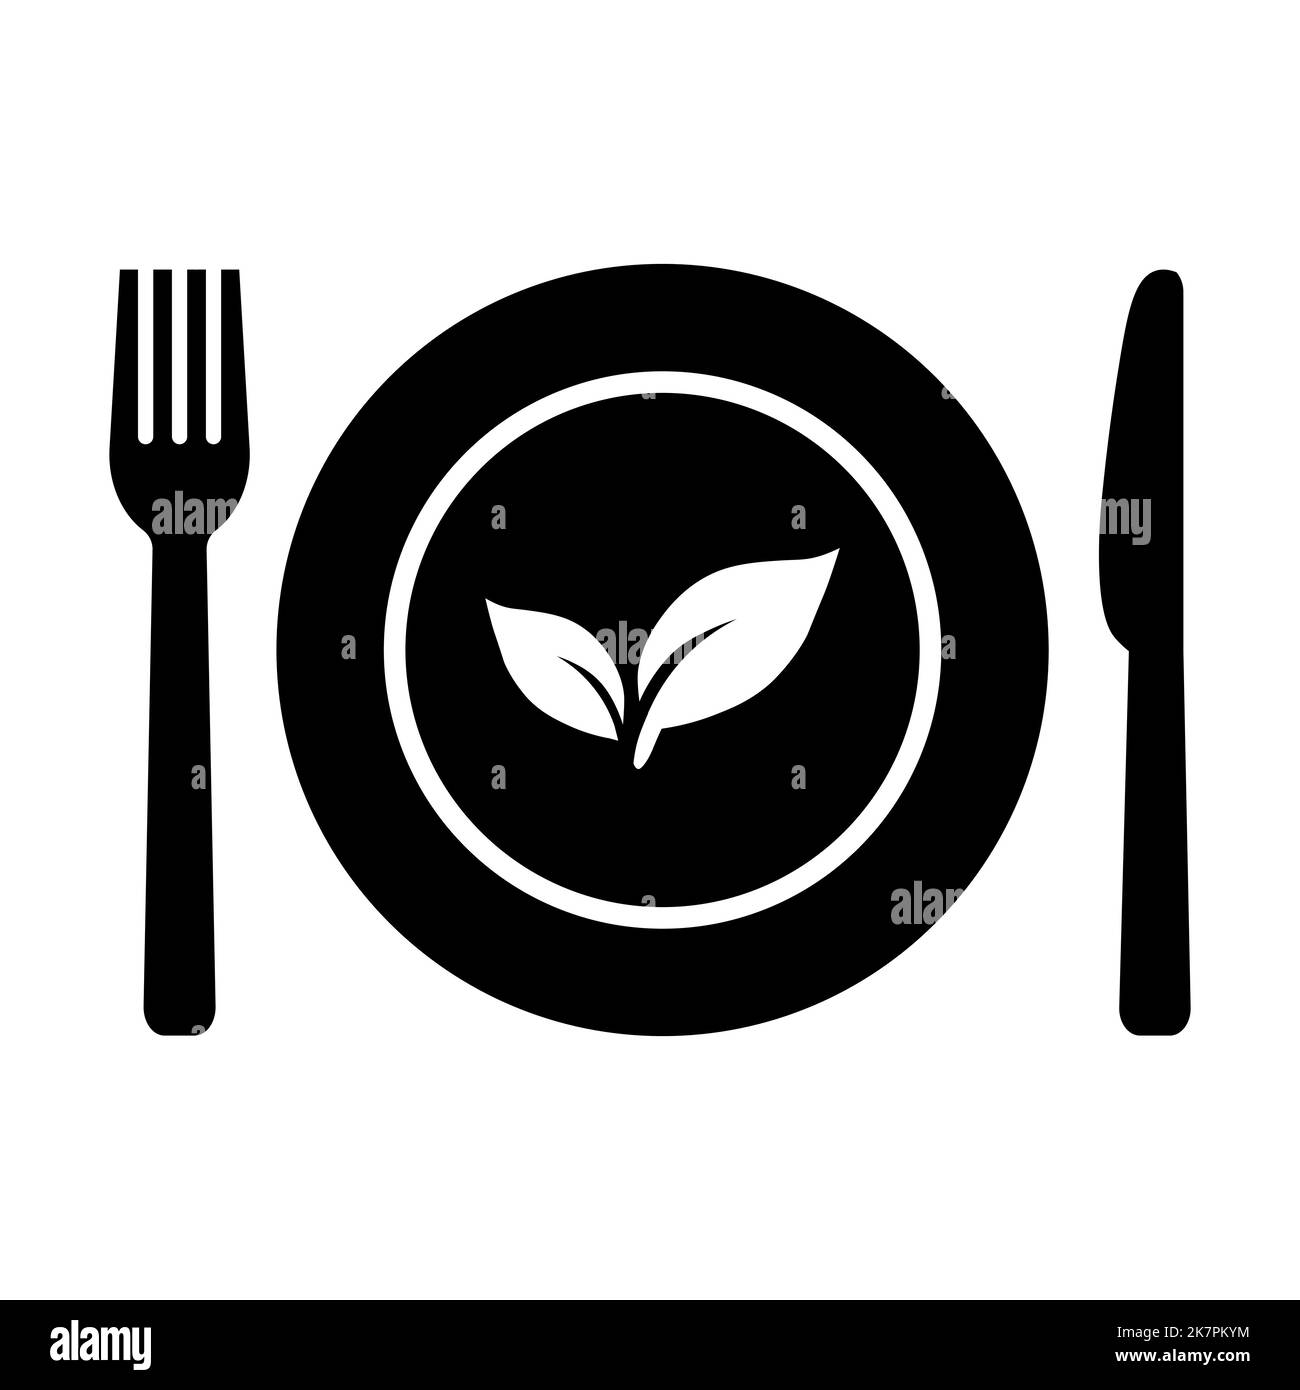 Healthy food icon in flat. Vegan salad on plate simbol on white. Plate, fork with knife and leaf sign. Simple nutrition for vegetarian restaurant Meal Stock Vector